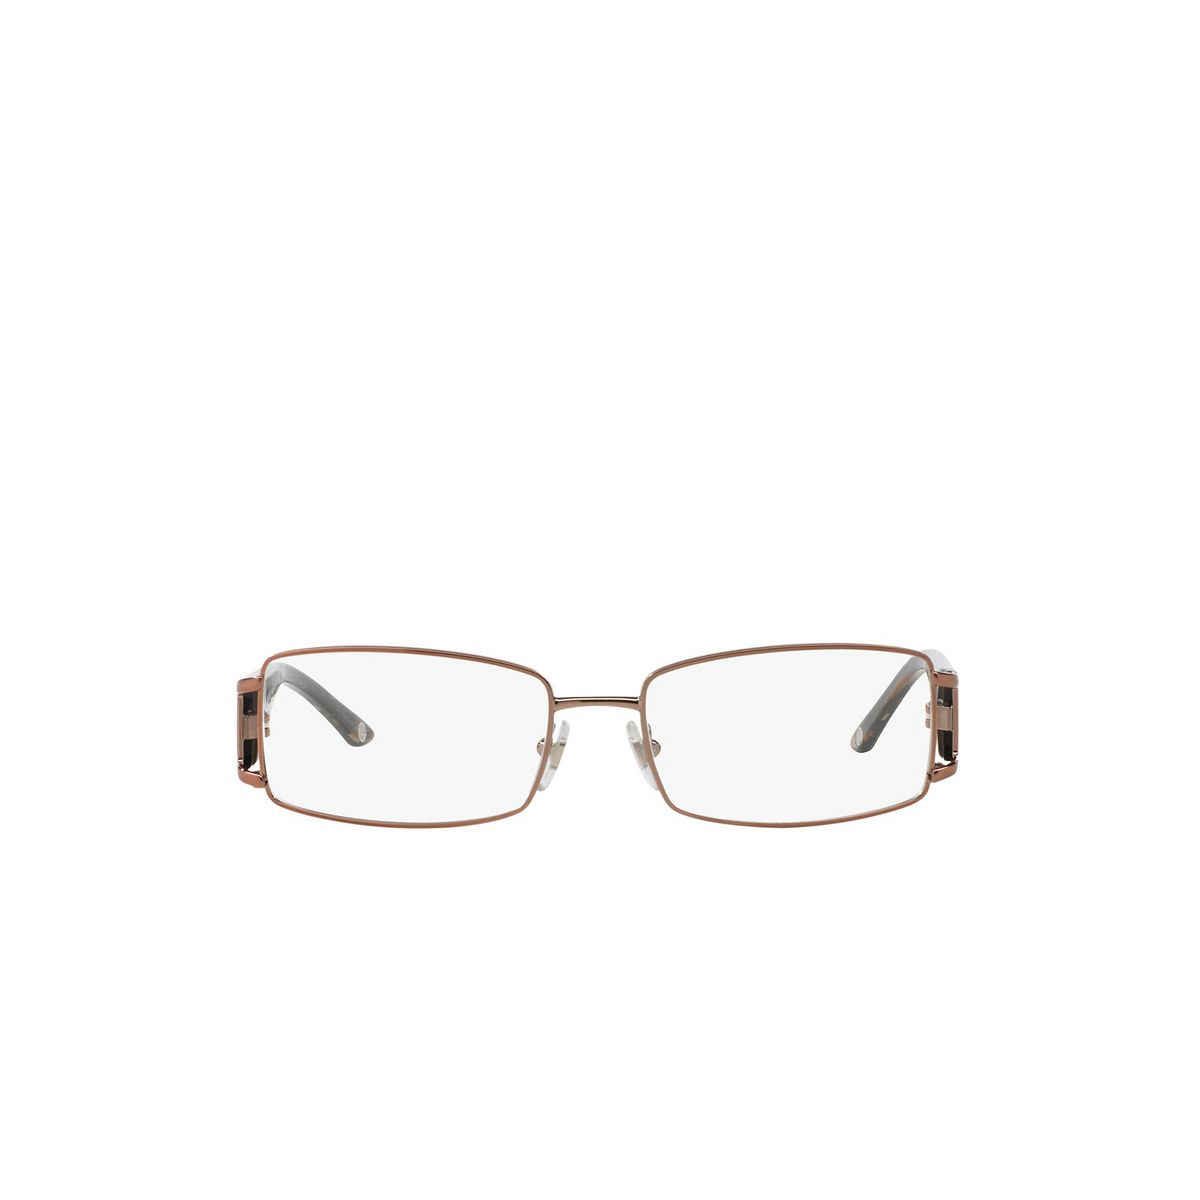 Versace® Rectangle Eyeglasses: VE1163B color Brown 1013 - front view.